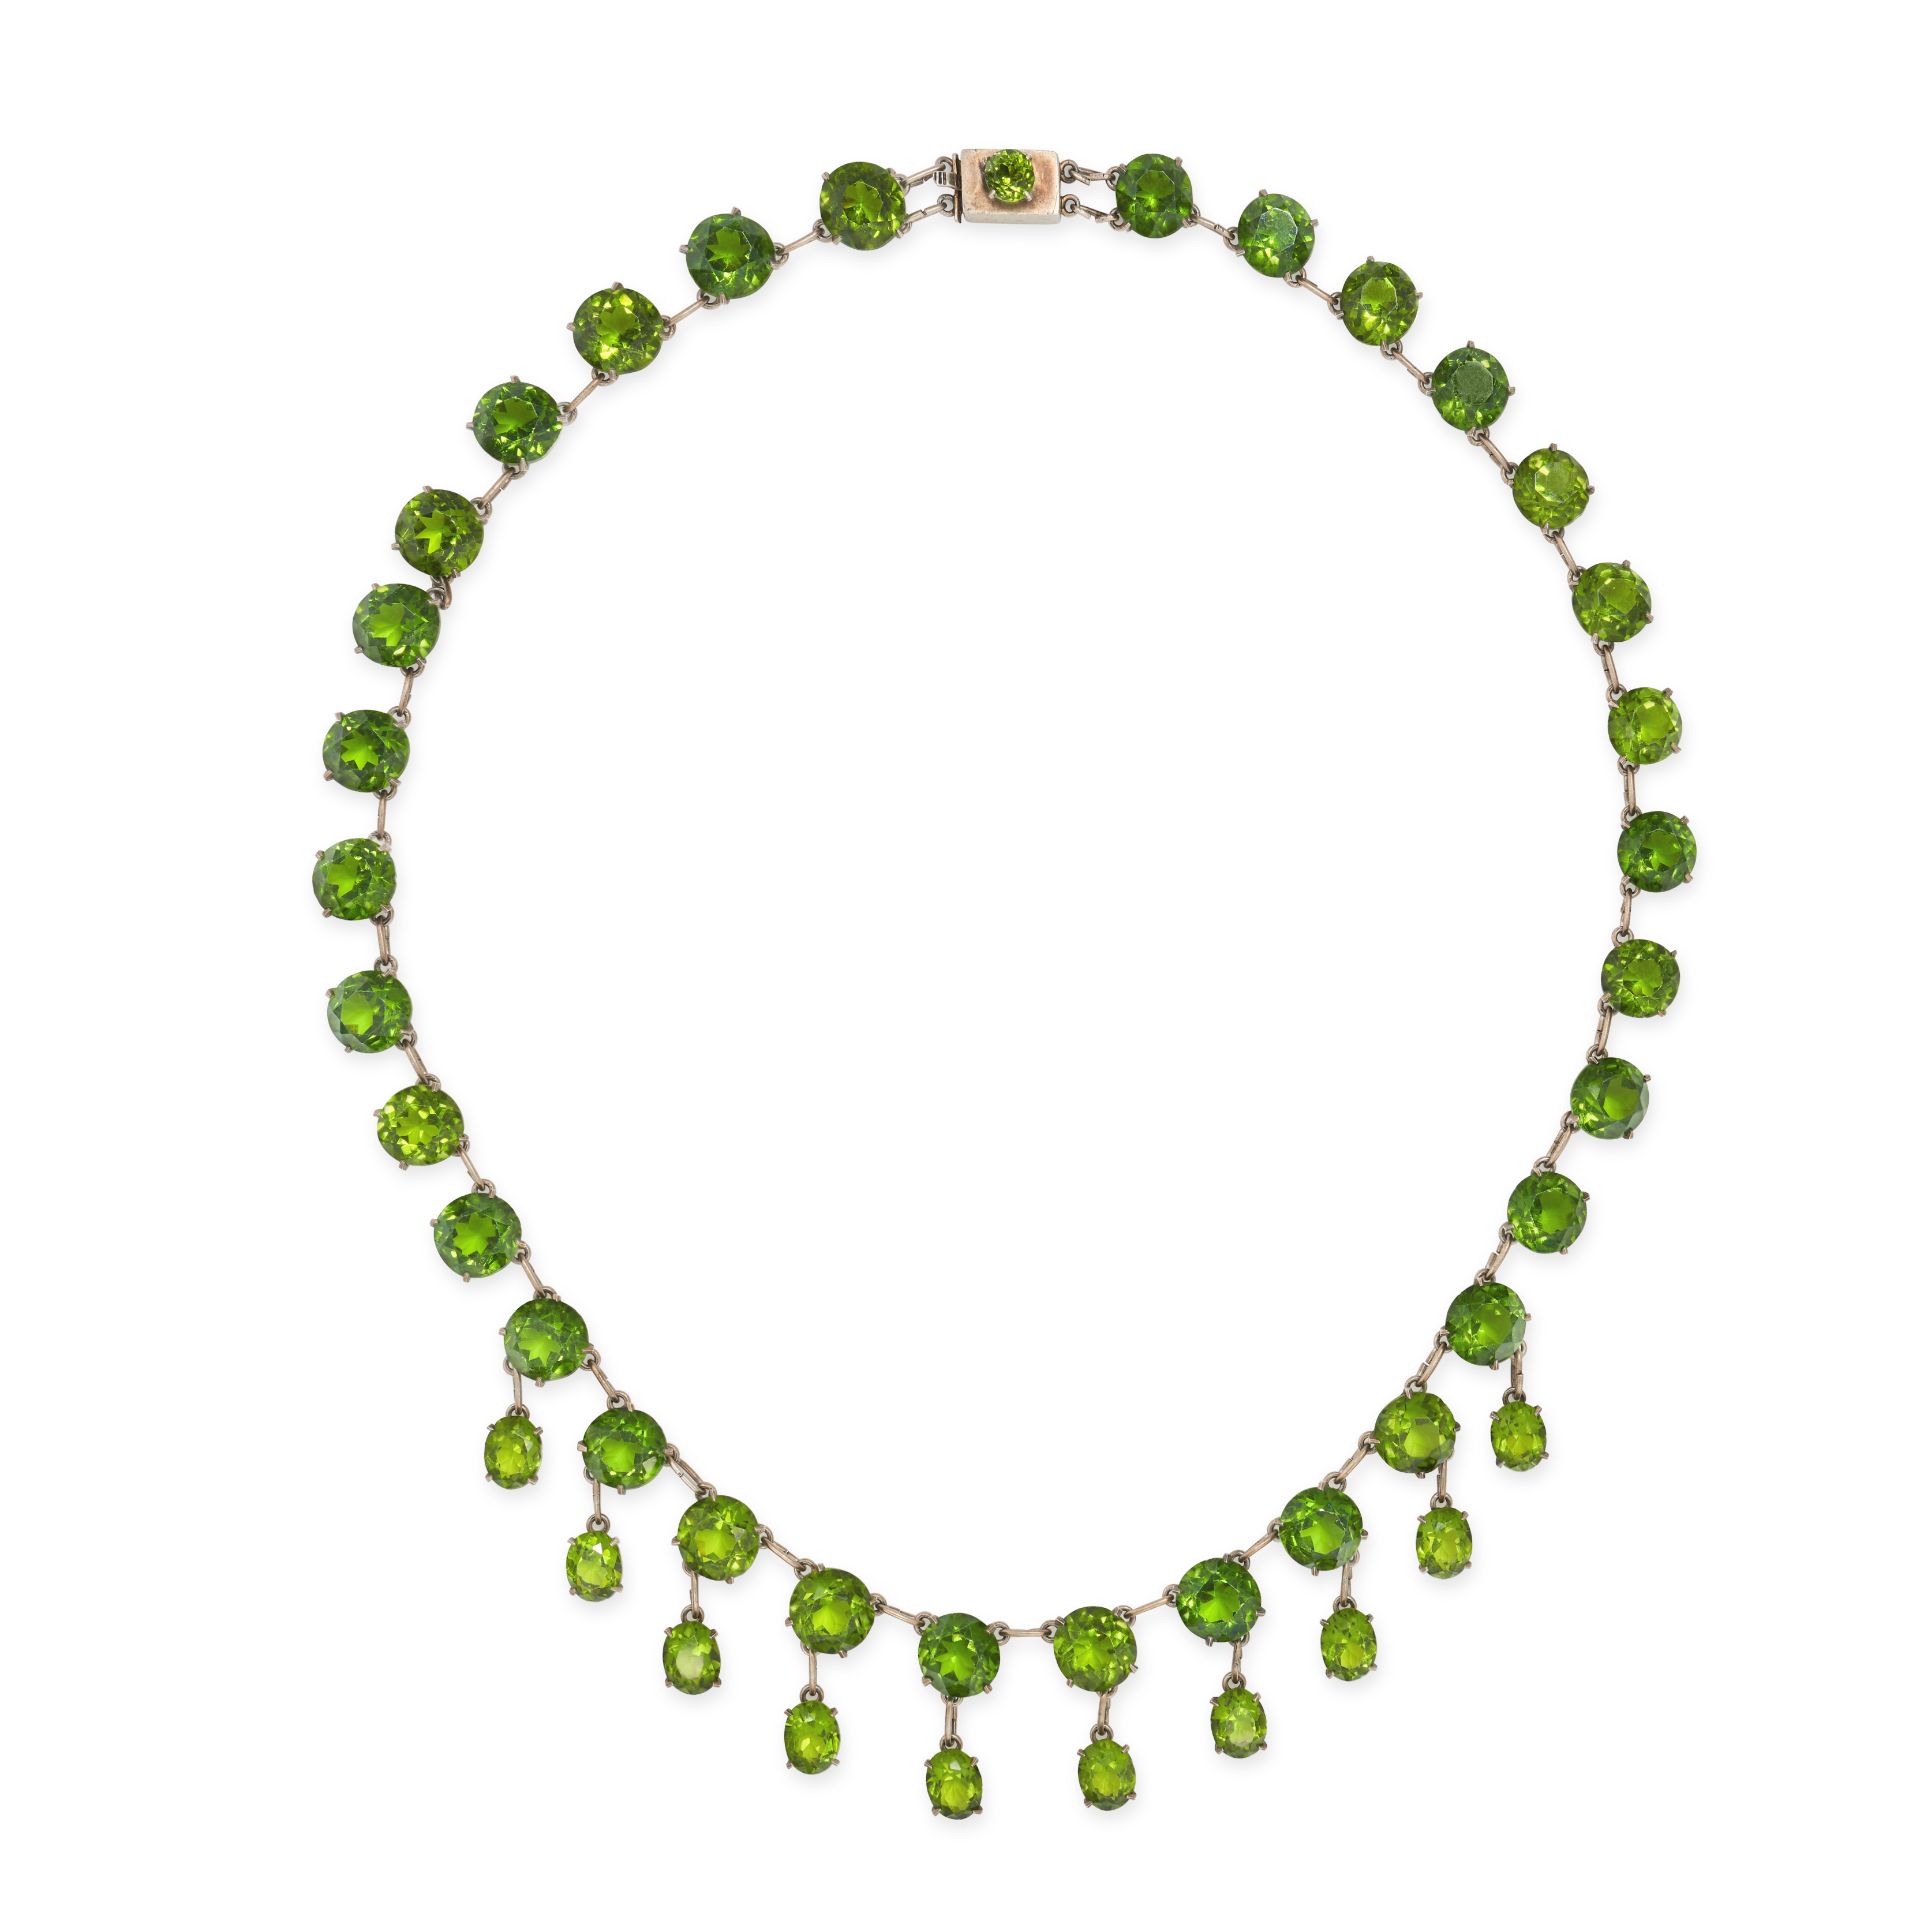 NO RESERVE - AN ANTIQUE GREEN PASTE FRINGE NECKLACE in silver, comprising a row of round cut gree...